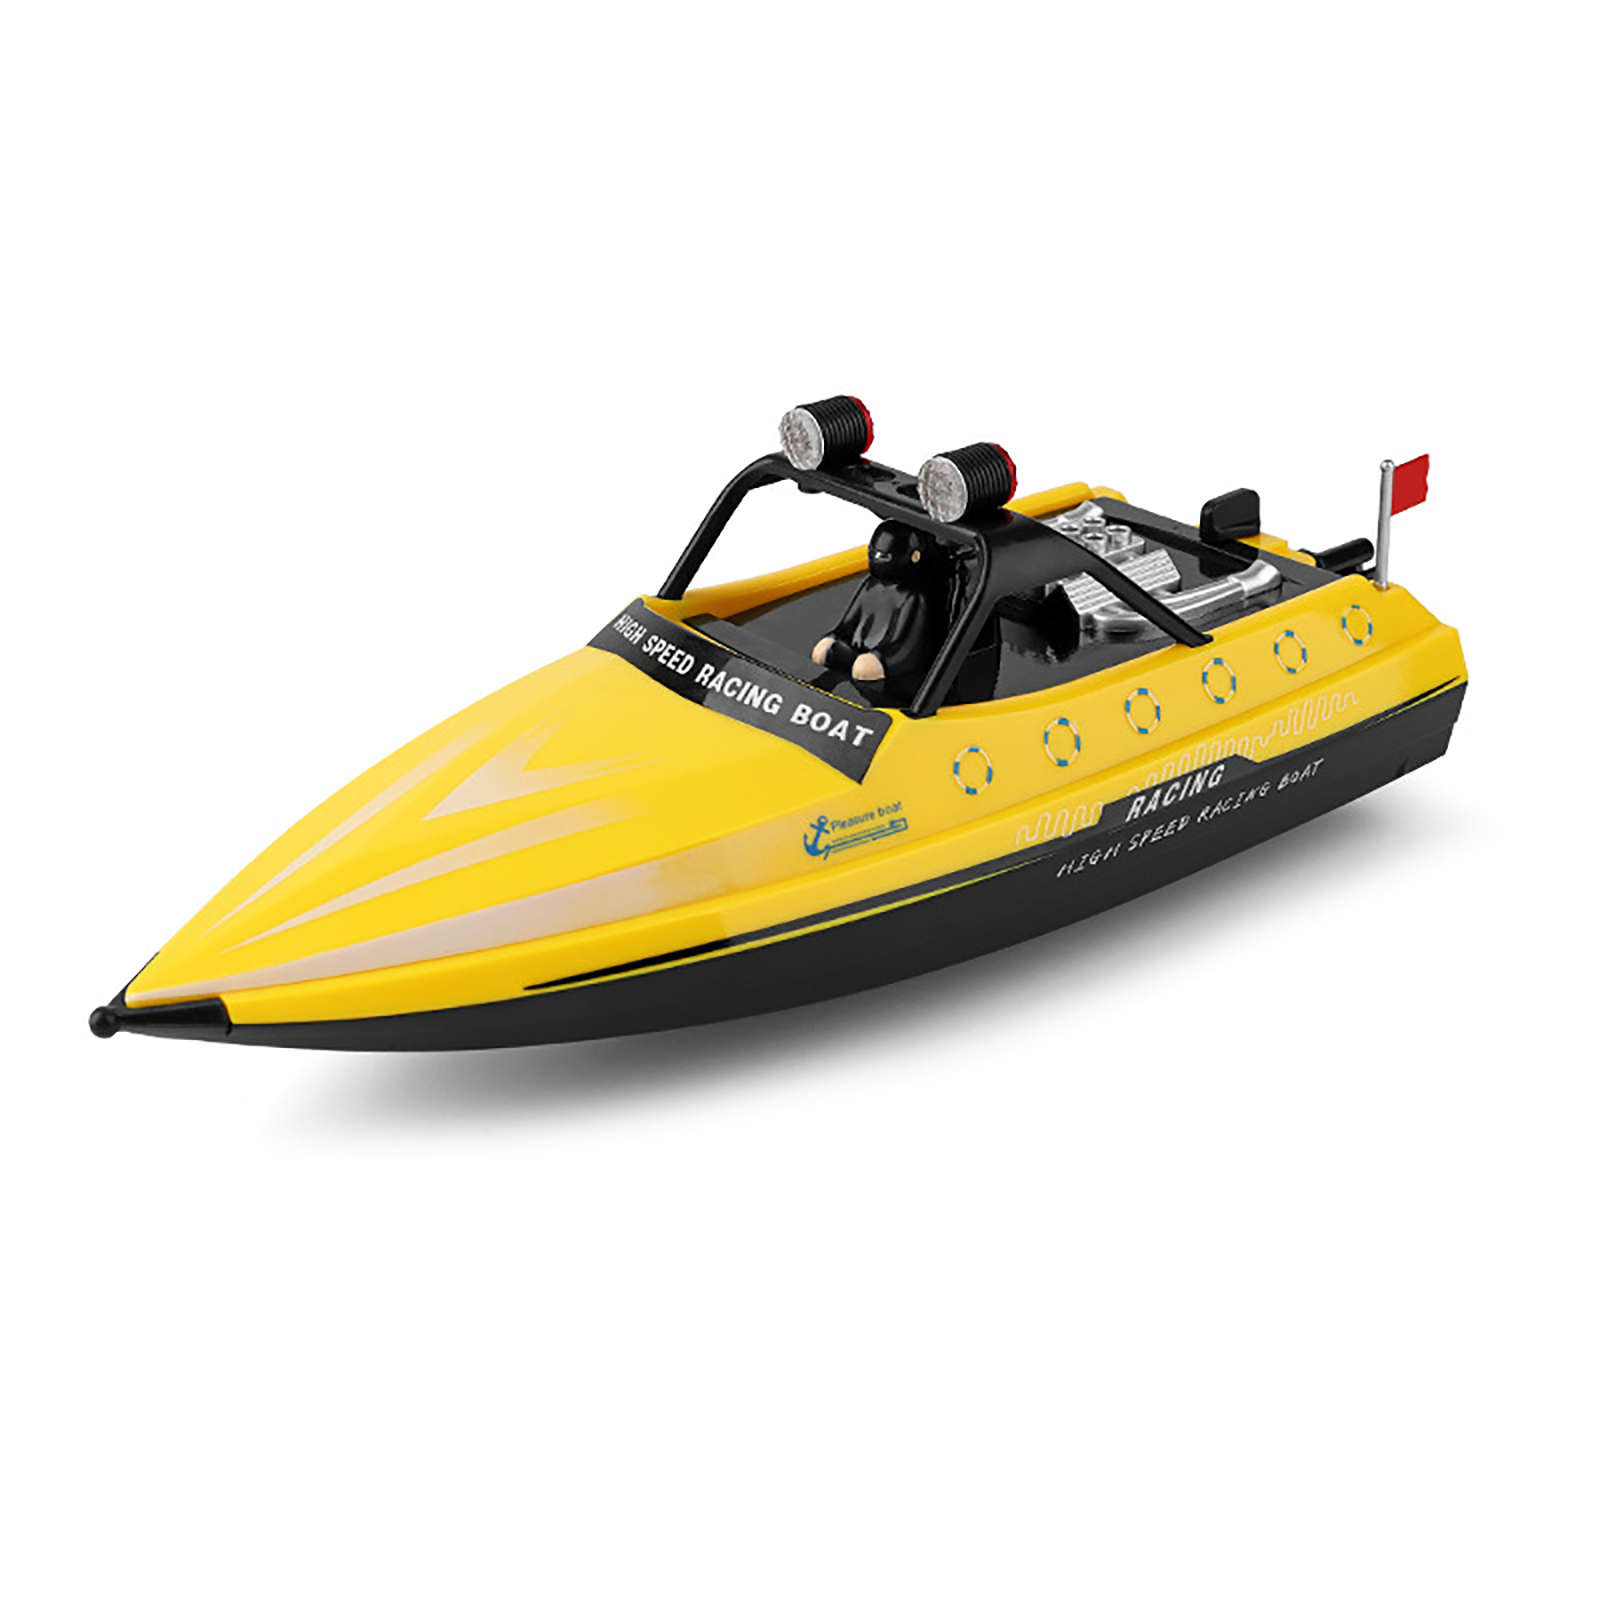 WLtoys Wl917 2.4ghz RC Boat High Speed 16km/H Remote Control Speedboat RC Jet Boat with Storage Bag